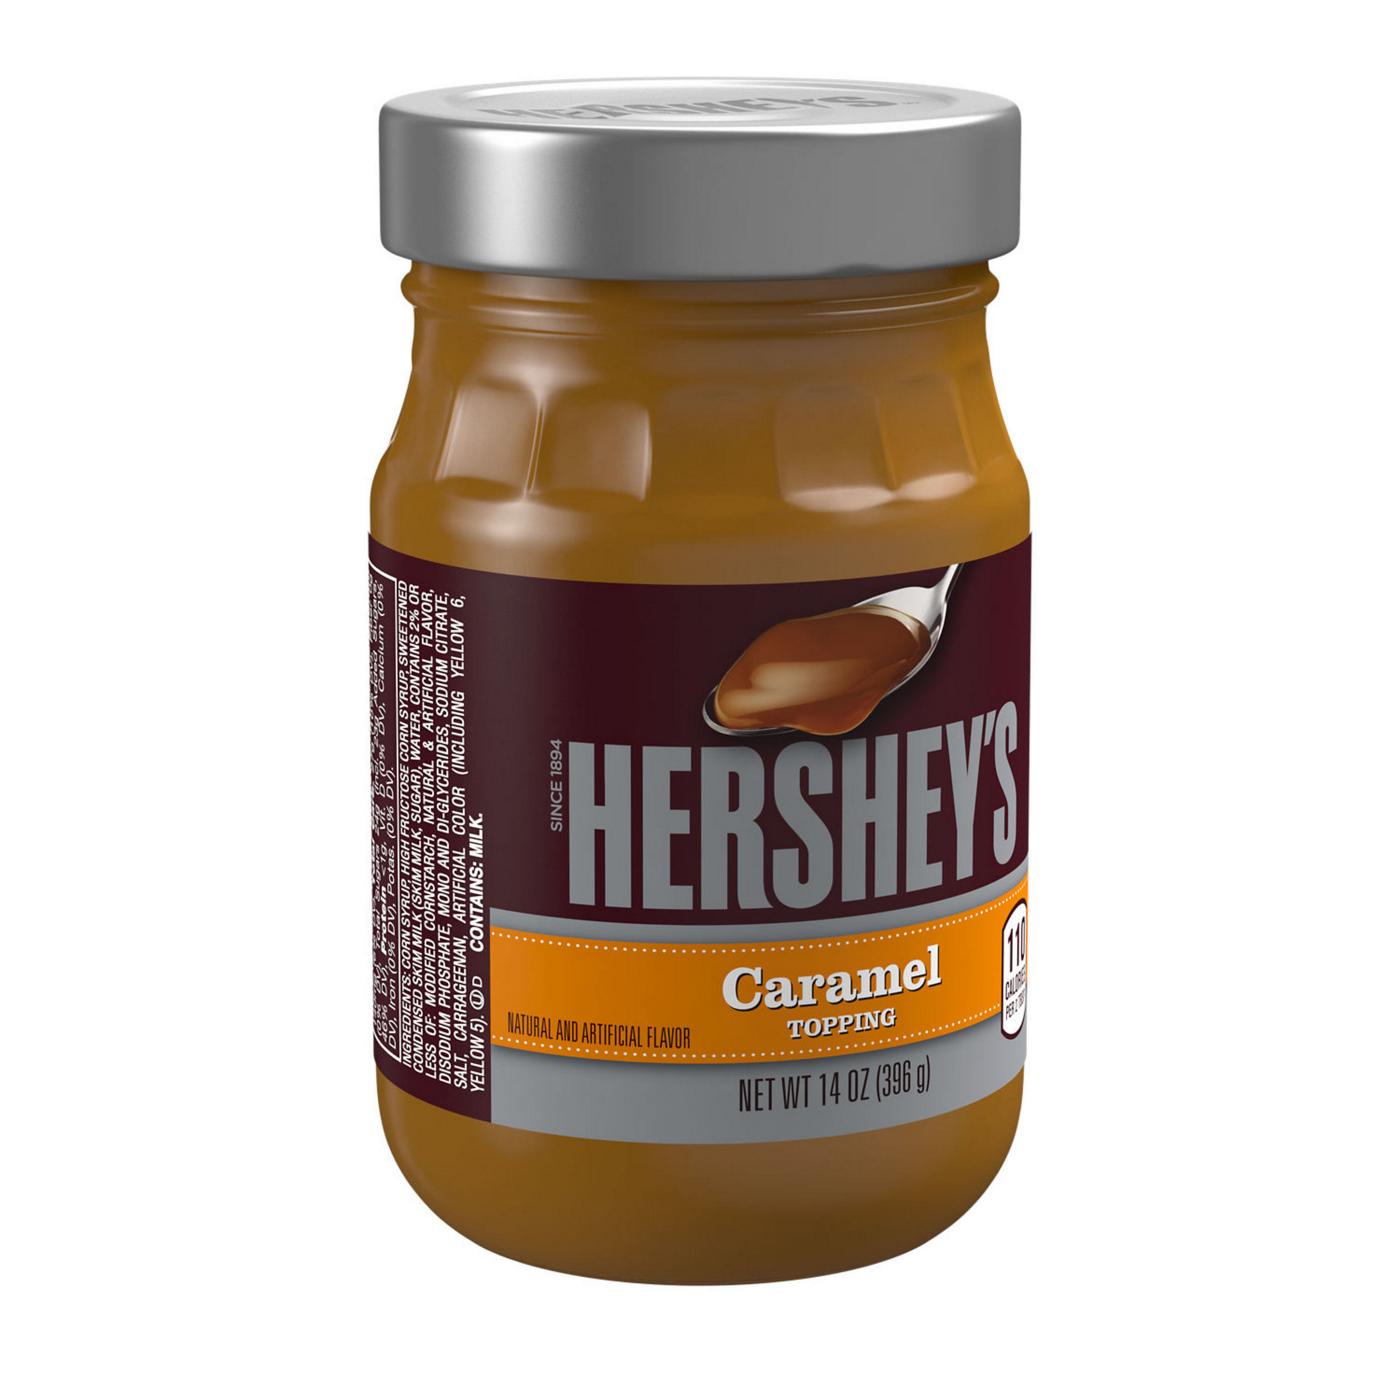 Hershey's Caramel Topping; image 8 of 8